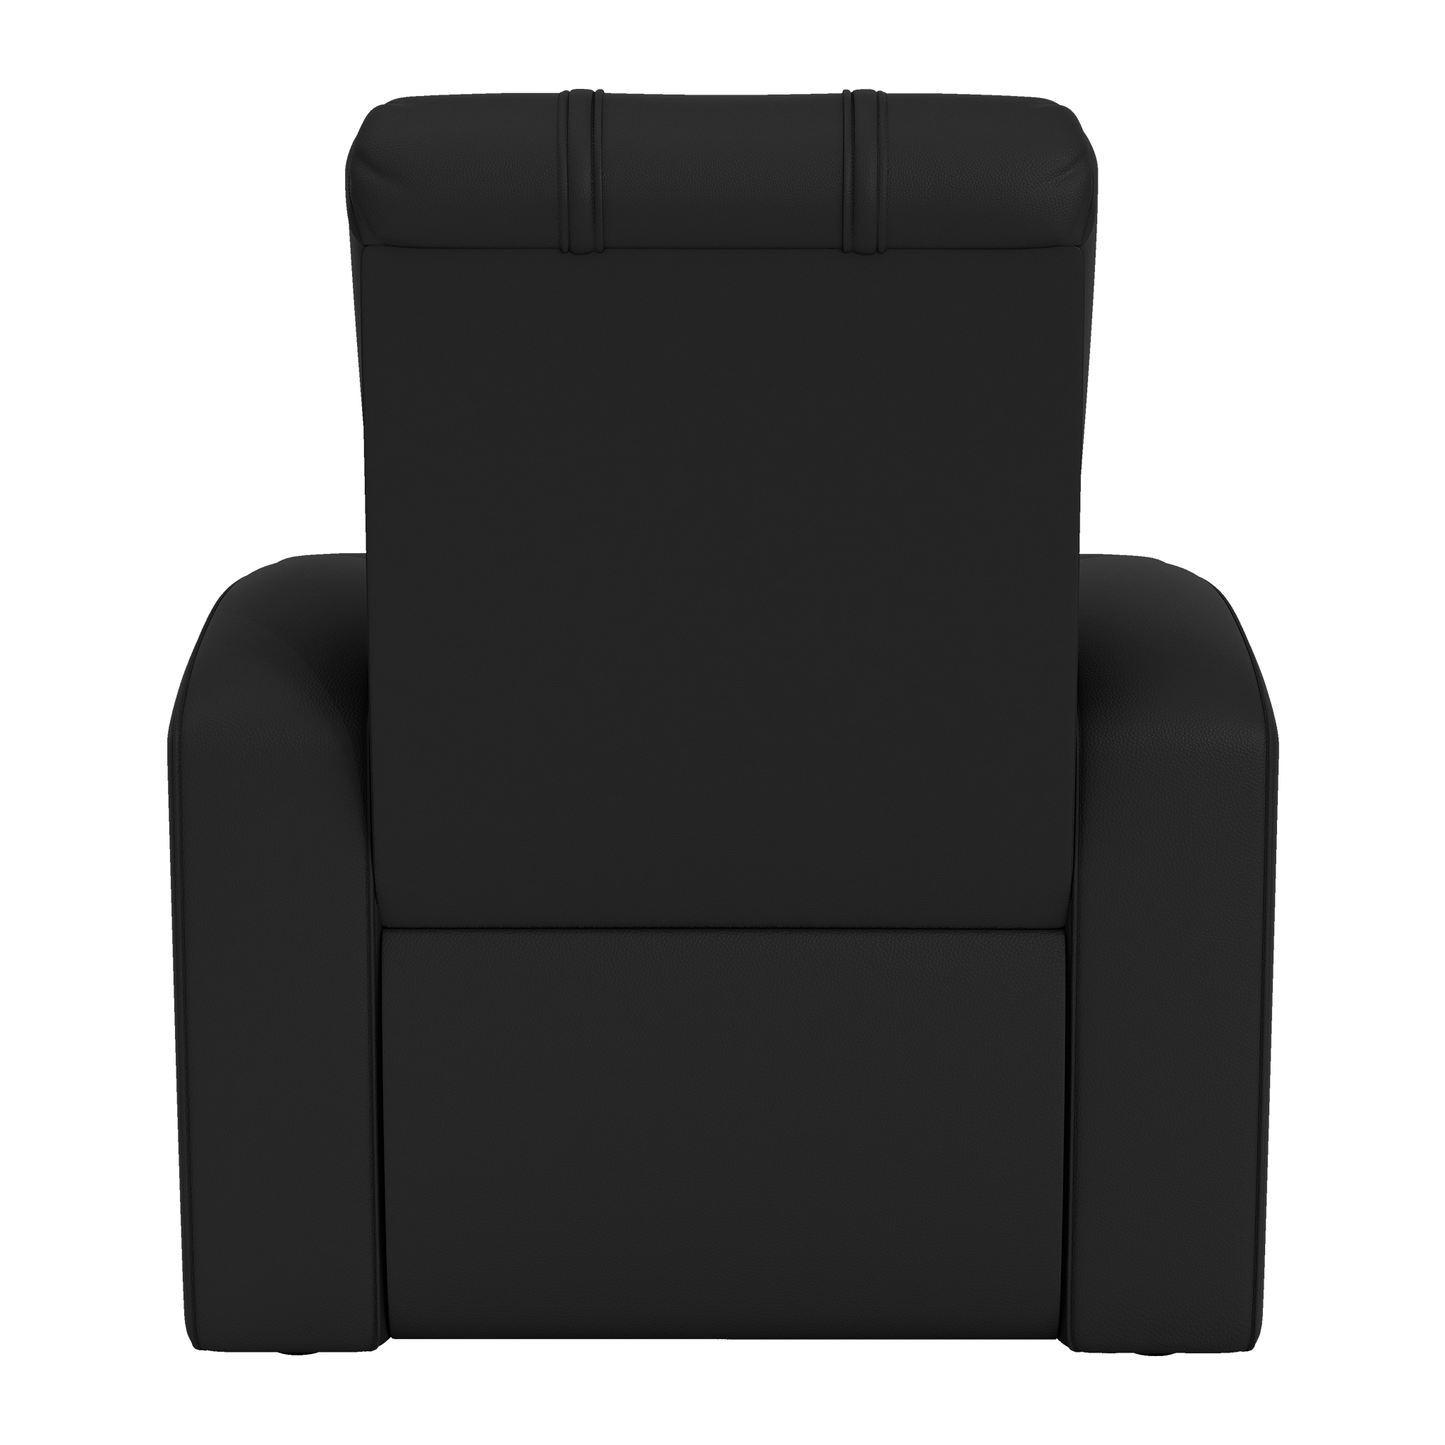 Relax Home Theater Recliner with Bucks Gaming Global Logo [Can Only Be Shipped to Wisconsin]